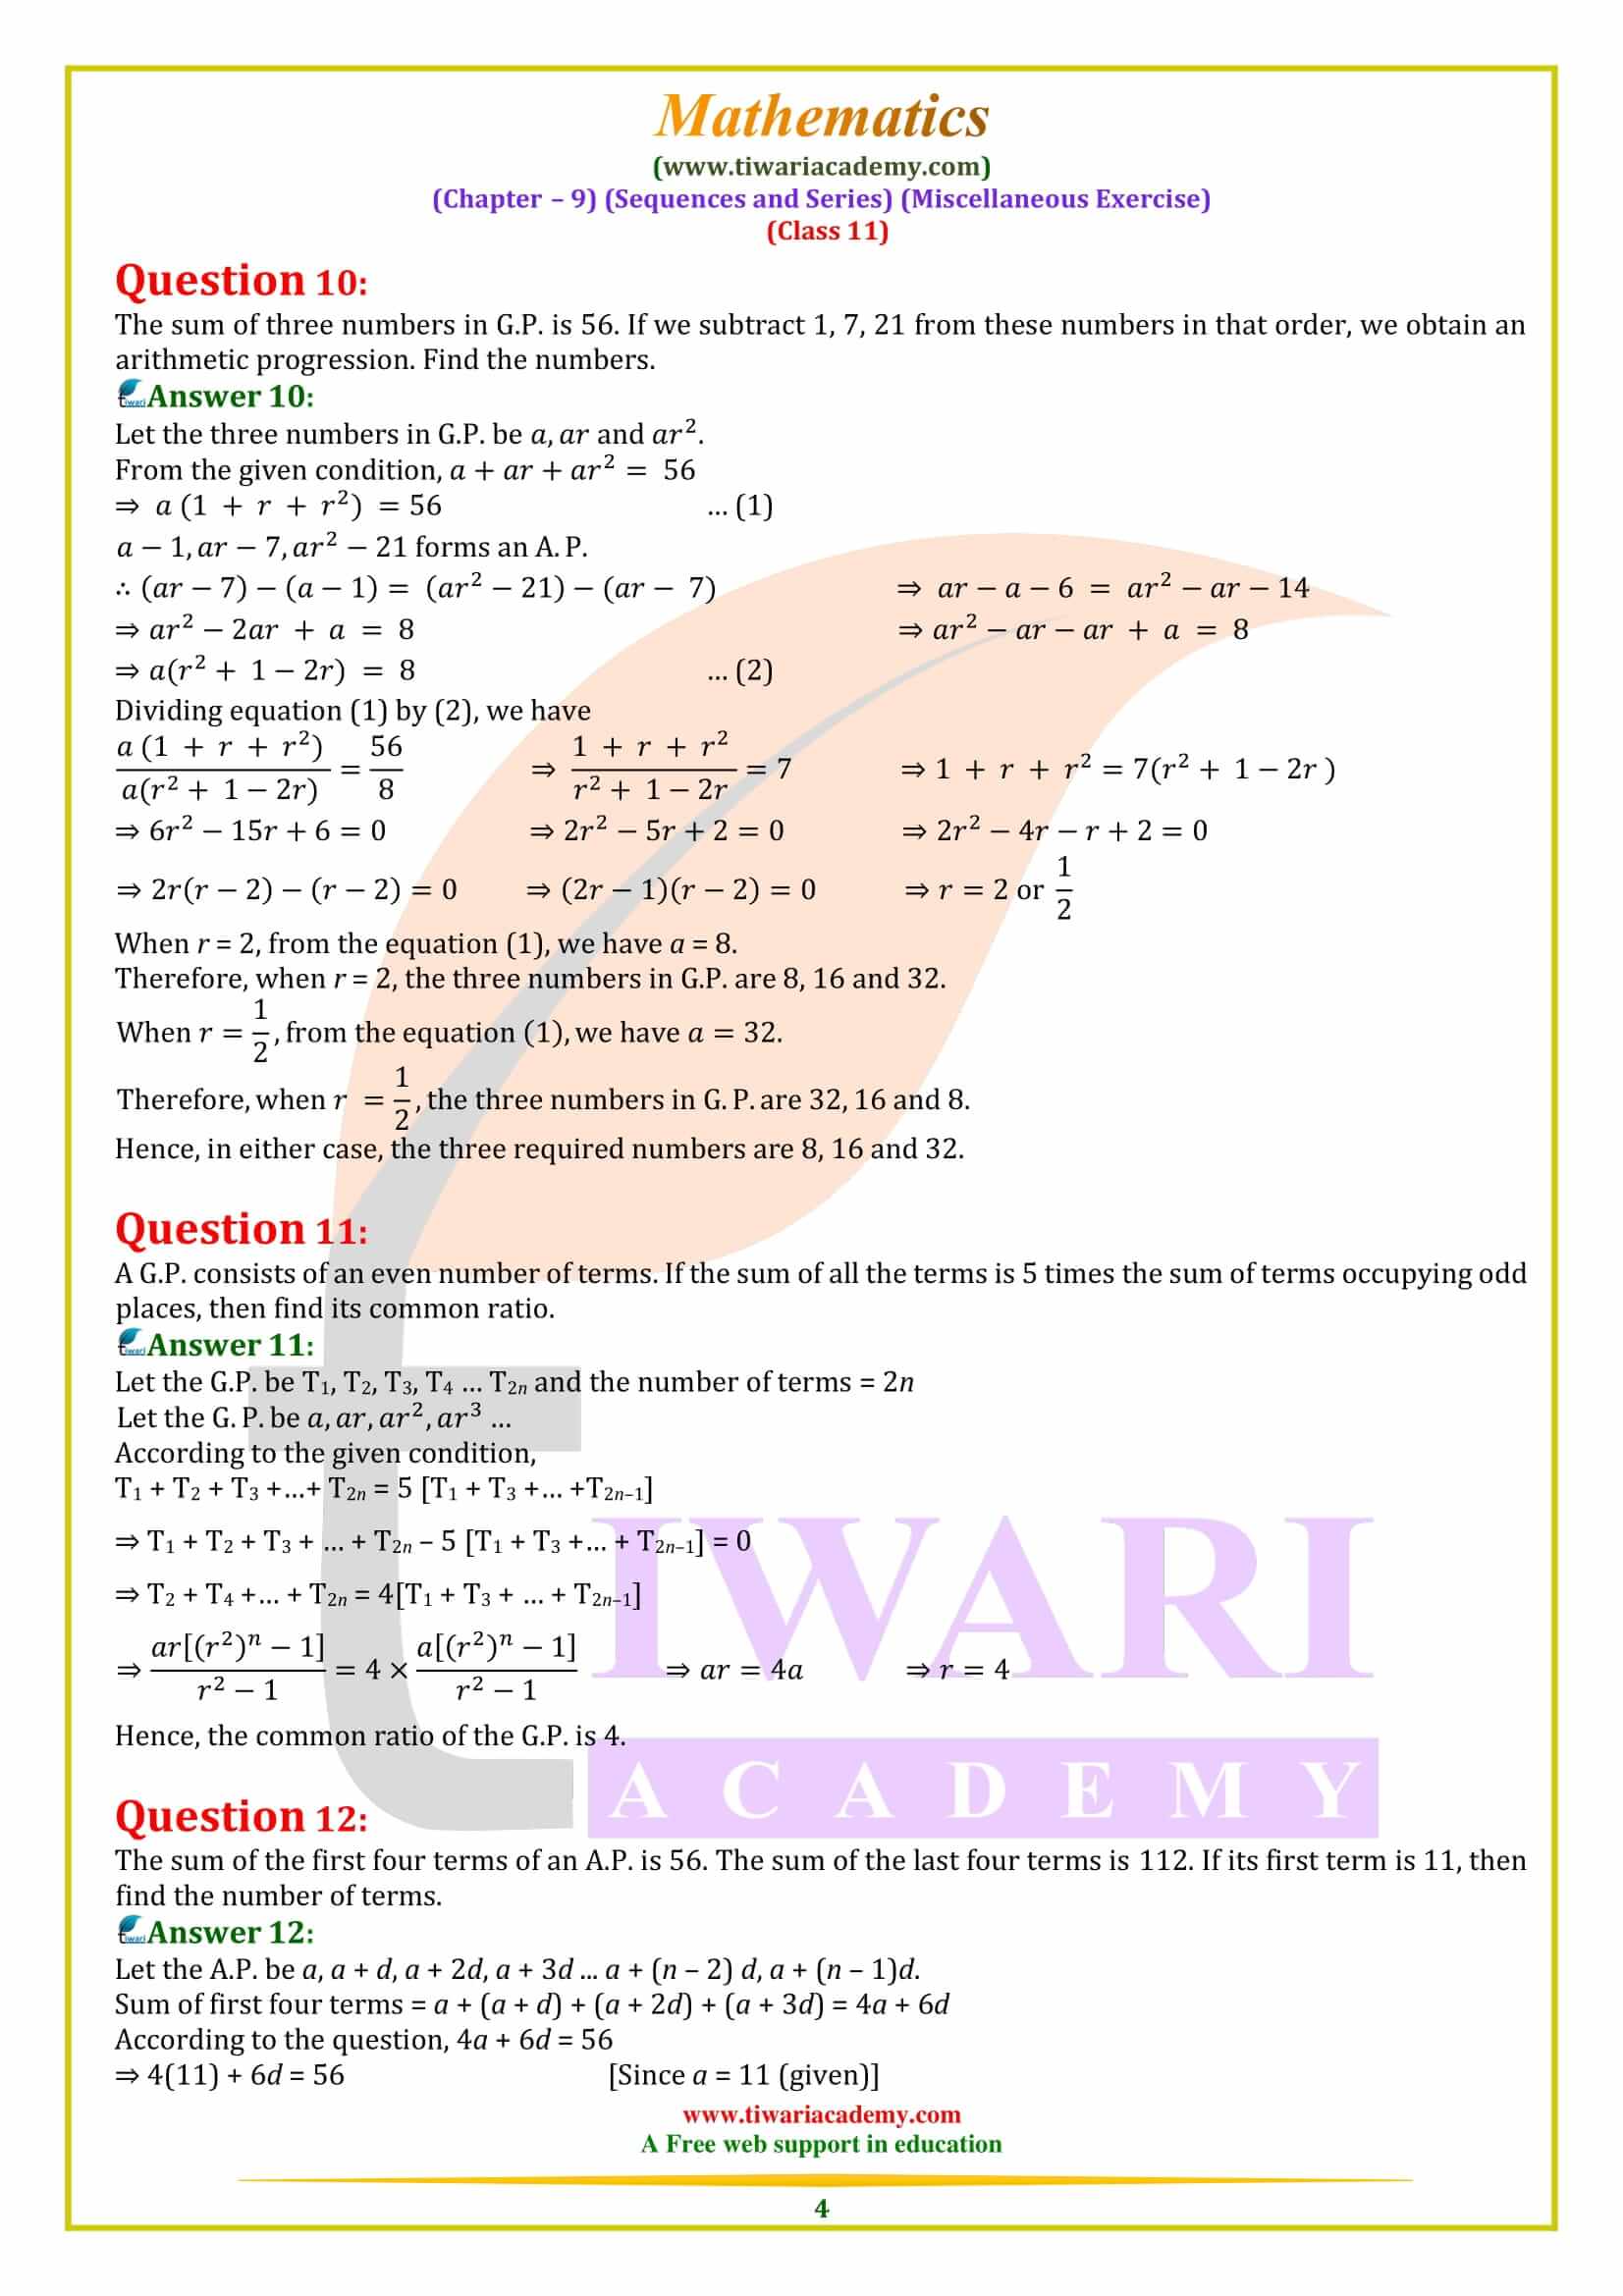 Misc. Ex 9 of 11th Maths